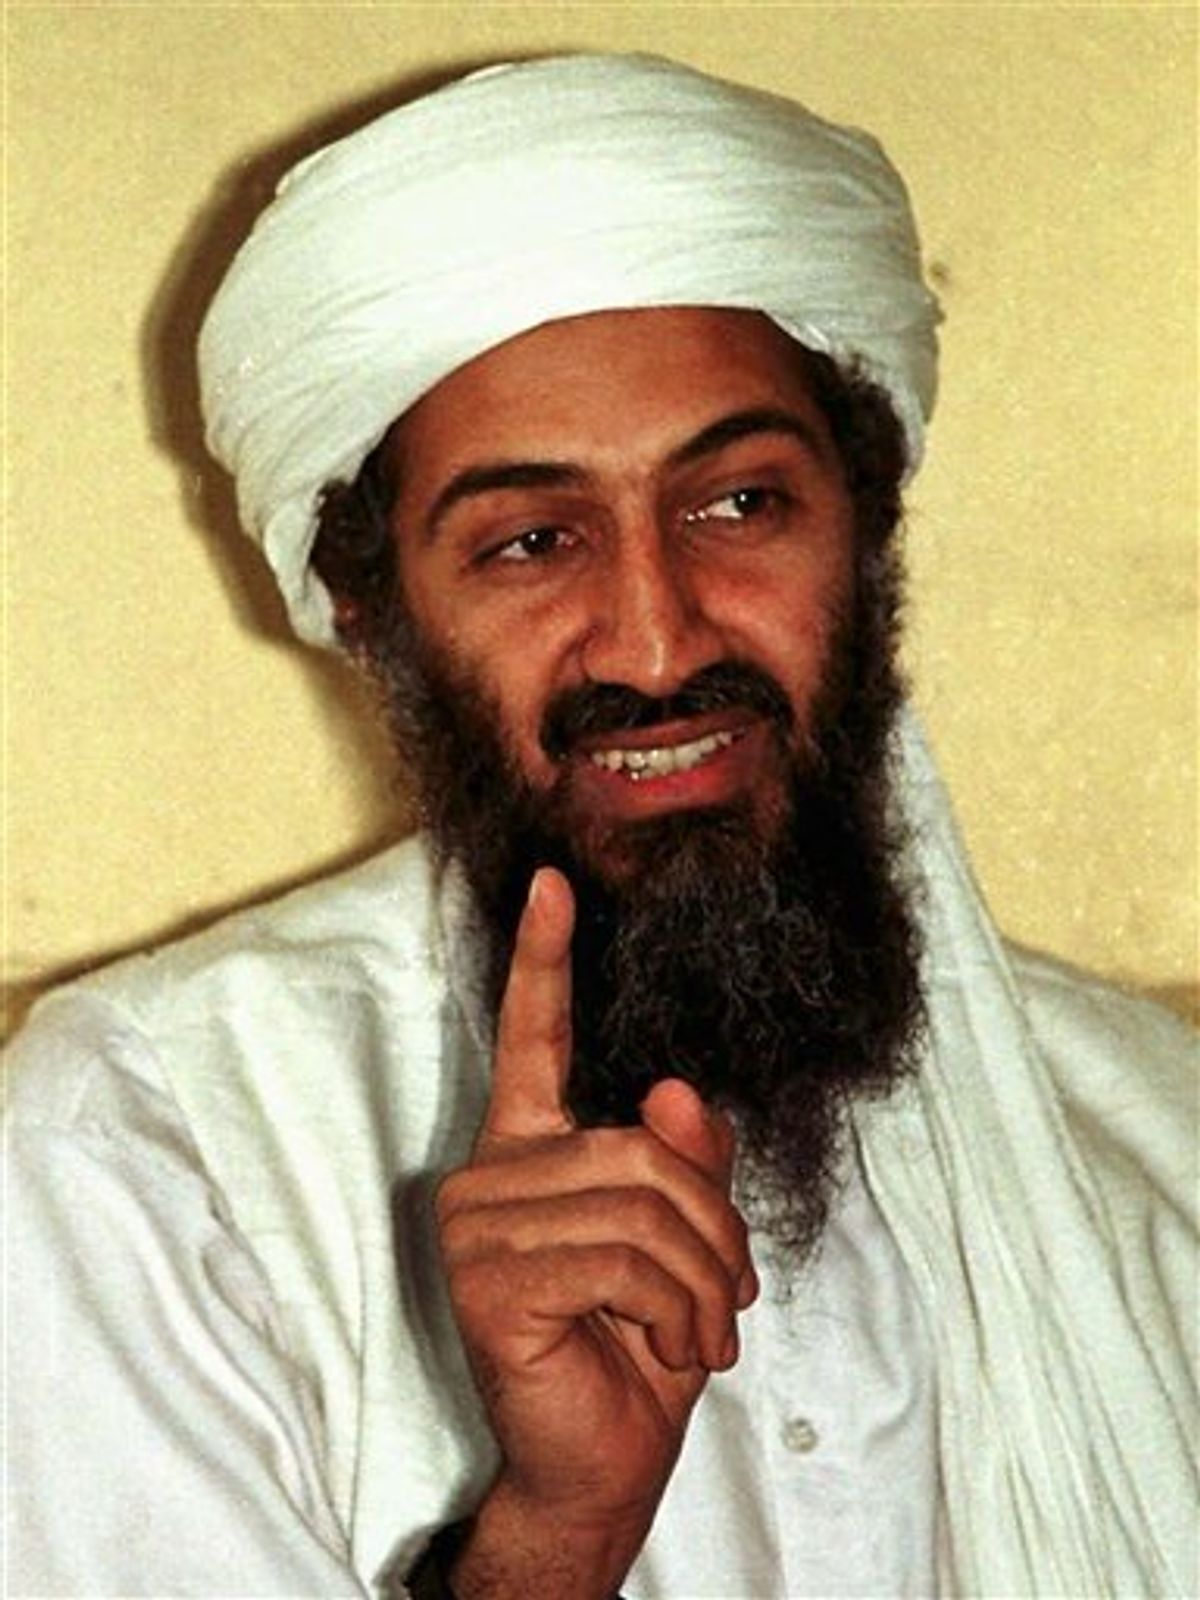 most wanted man in the world after bin laden